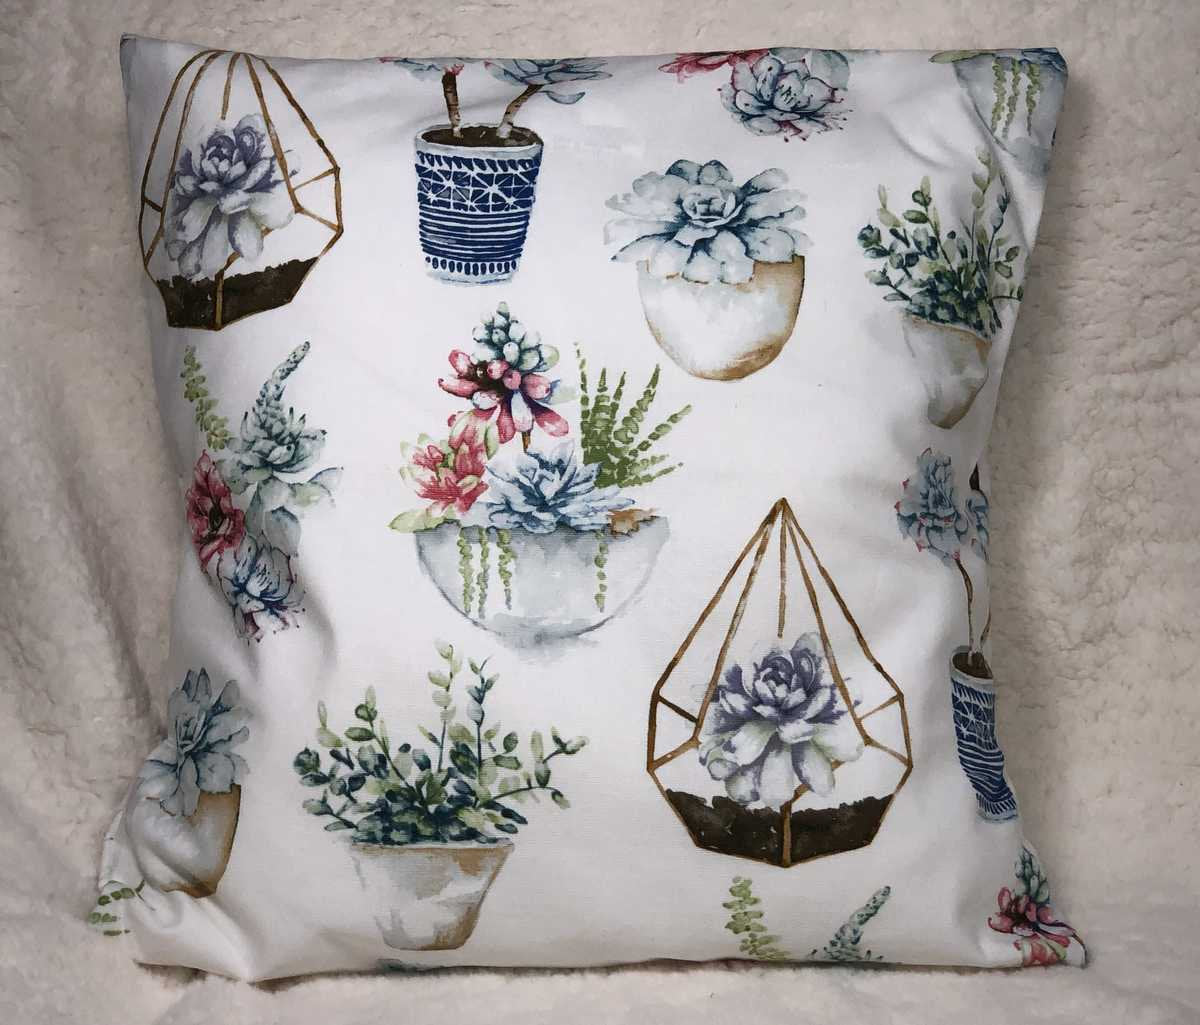 Hanging Potted Flower Plants Pillow Cover, Floral Potted Plants Sofa Accent Pillow Sham, Farmhouse Pillow Cover, Handcrafted Pillow Cover